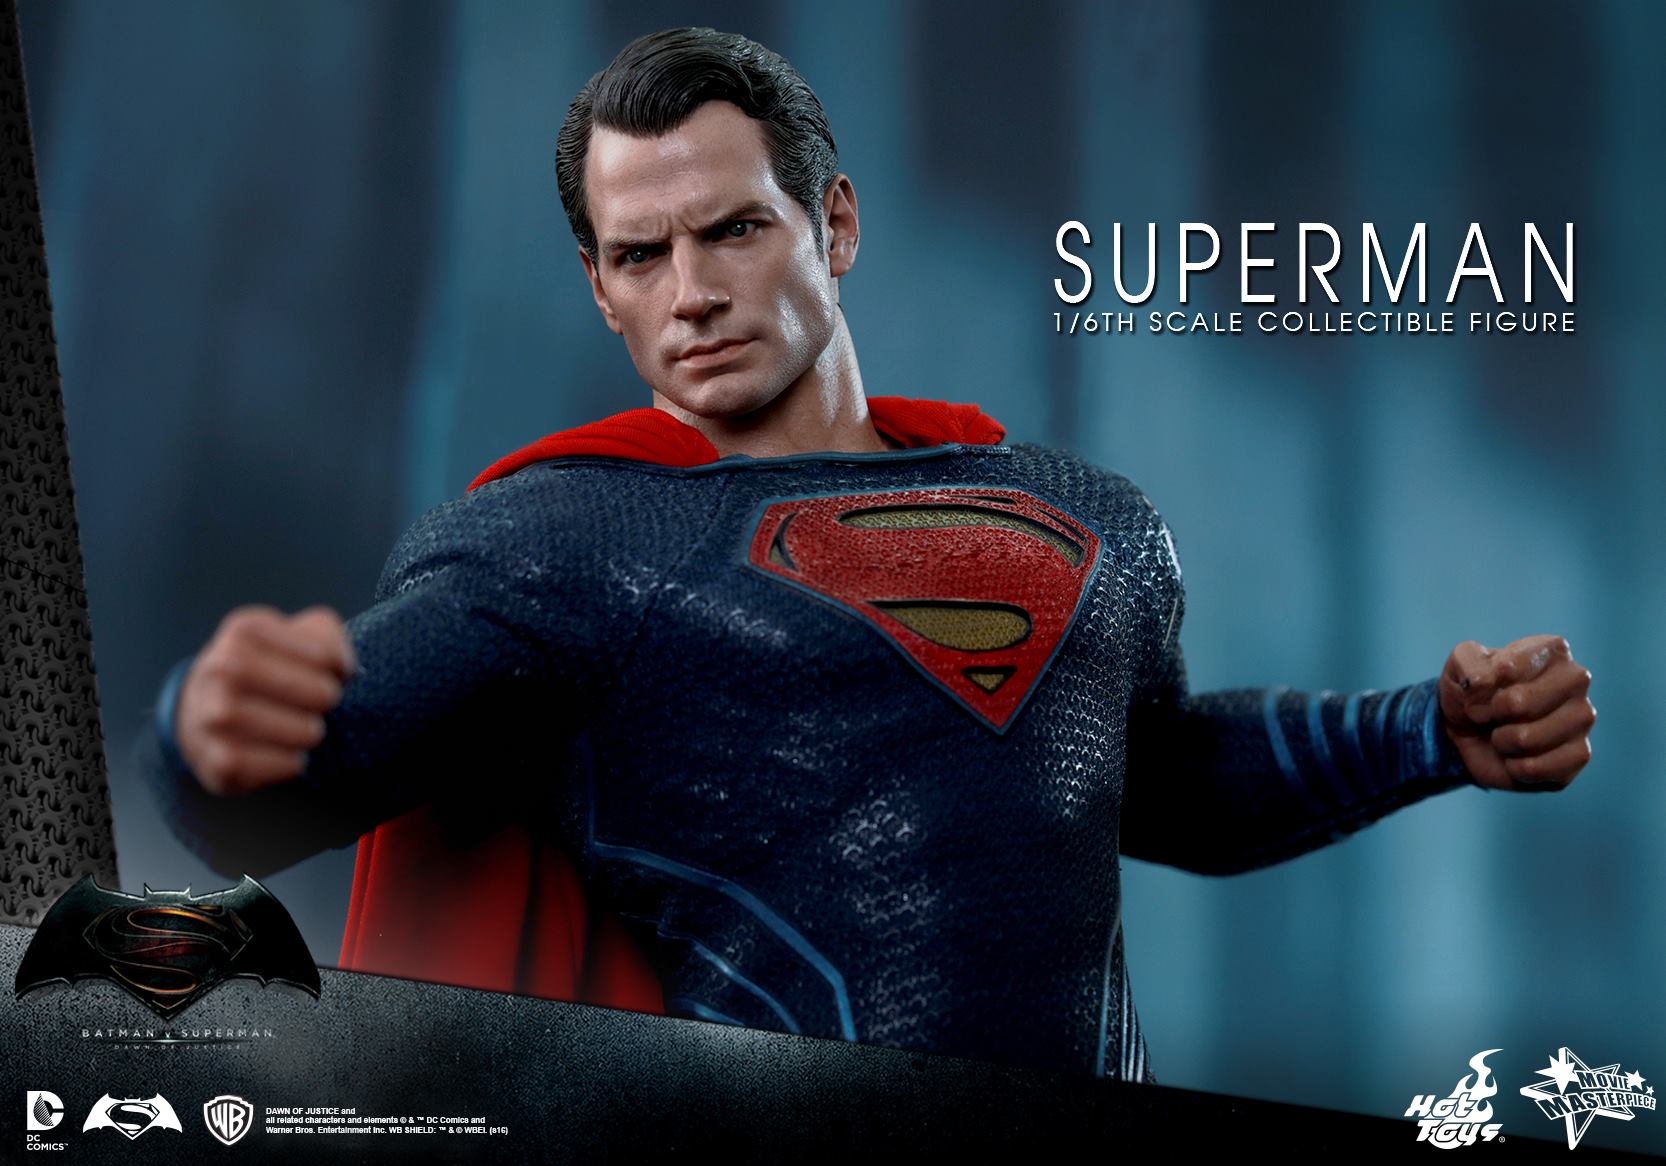 Giant Necks And Stern Looks Abound In Hot Toys’ Batman V Superman Figures